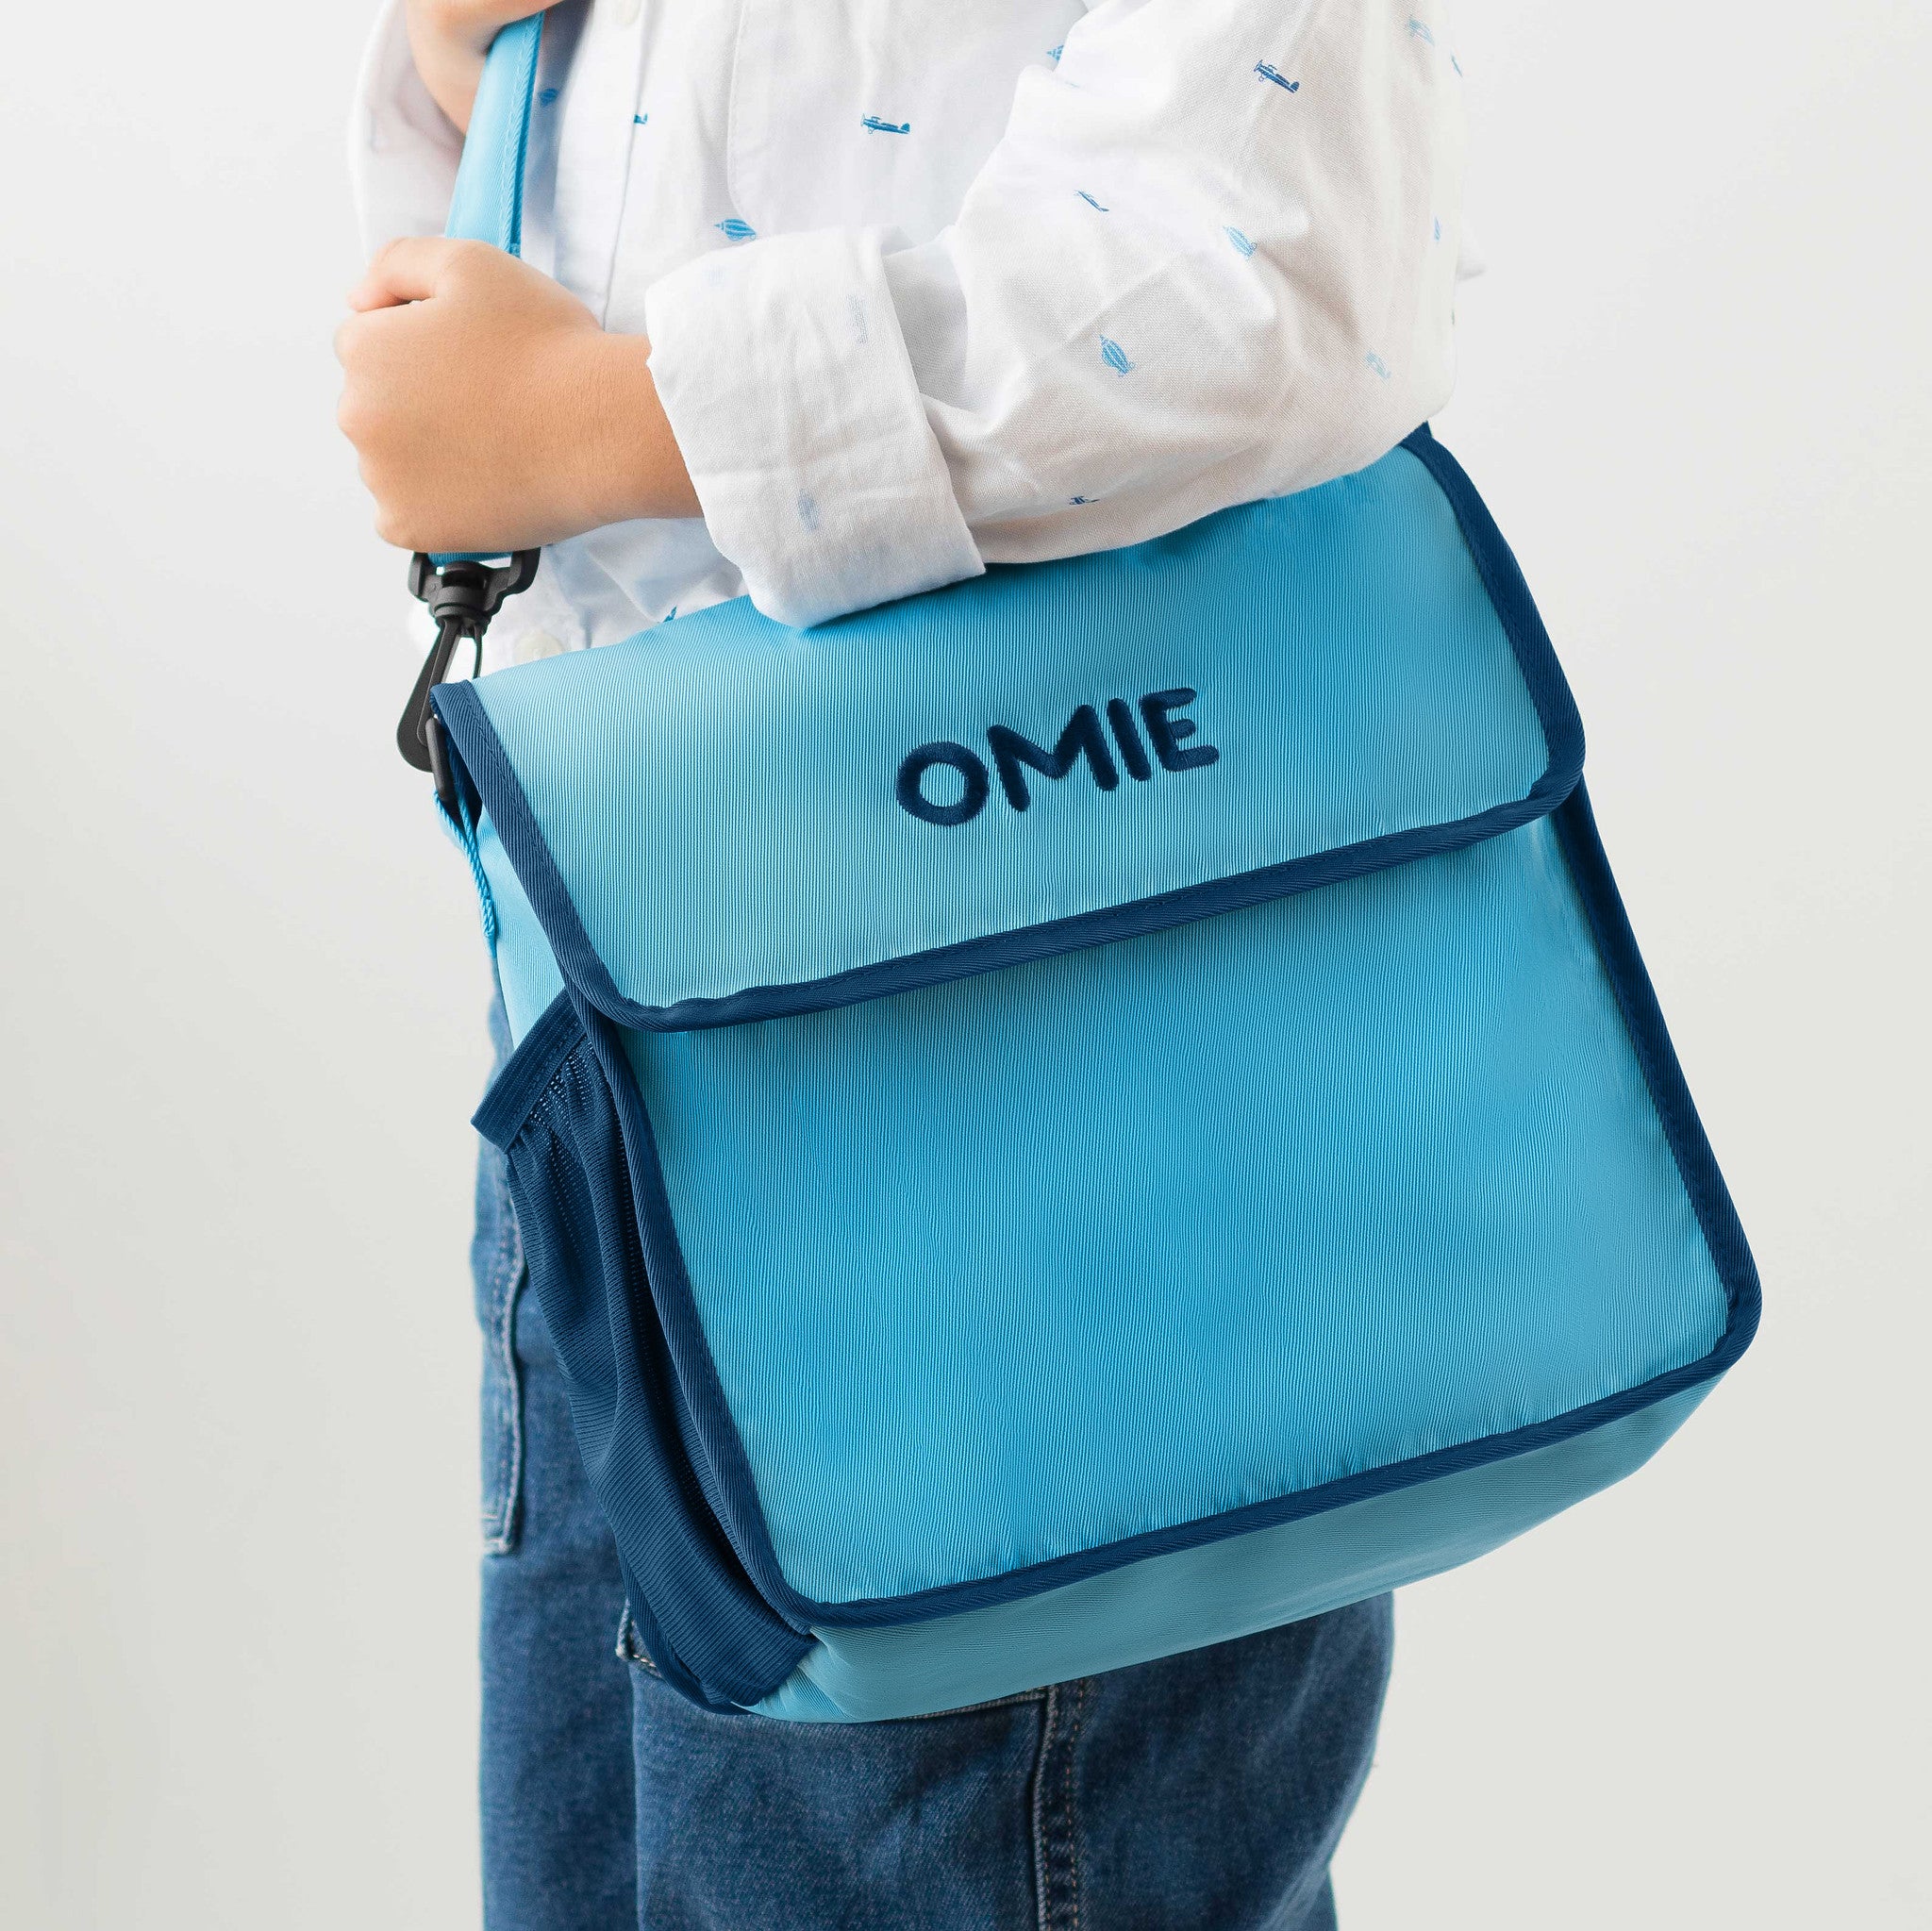 Omie Green Lunch Box Container RARE School Work Food Tray OmieLife